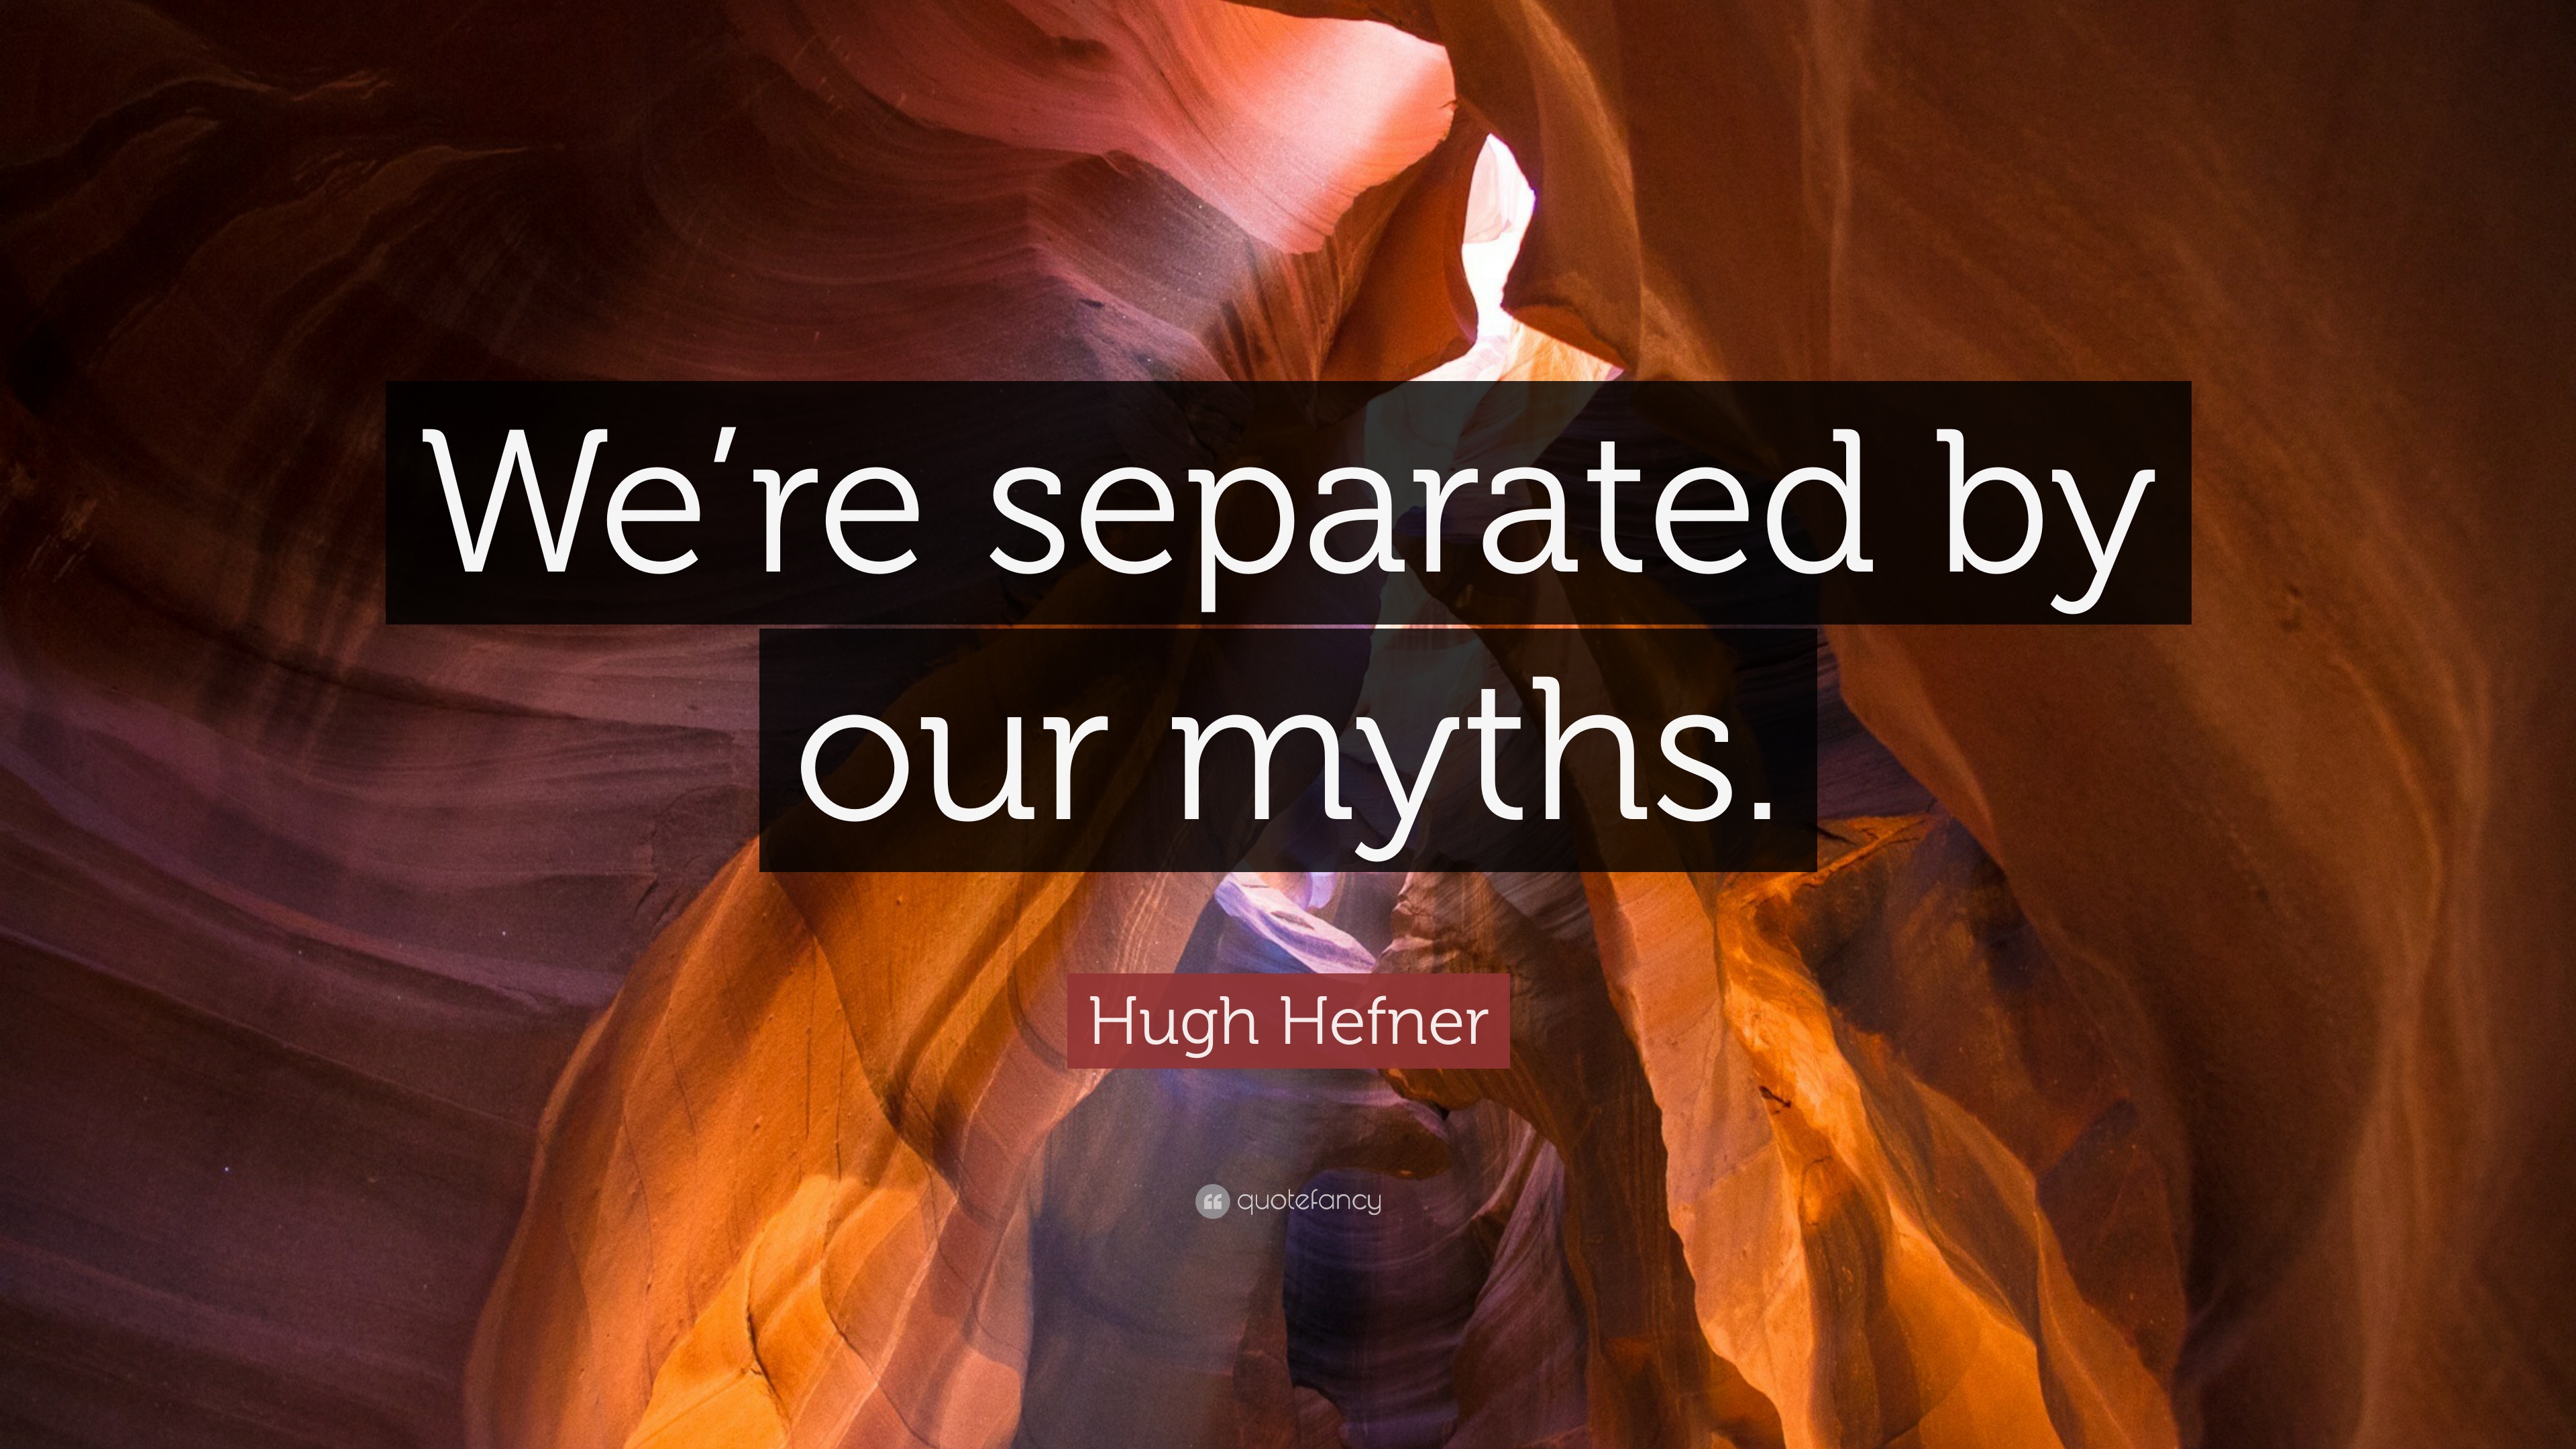 Hugh Hefner Quote: “We're separated by our myths.” 7 wallpaper